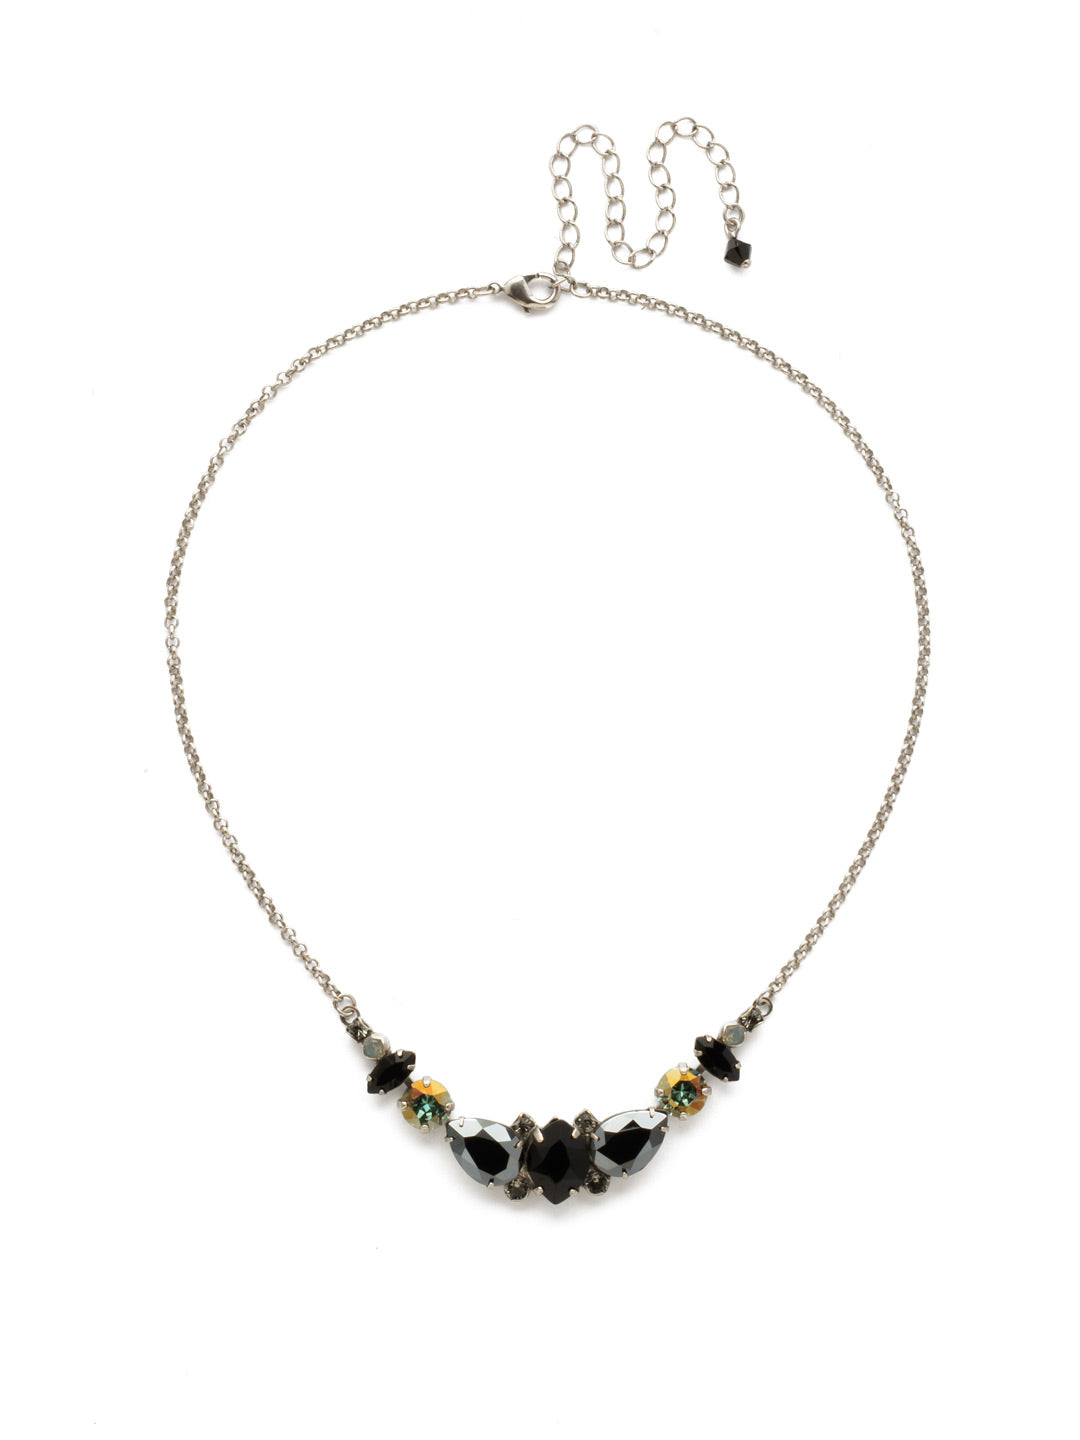 Crysanthemum Statement Necklace - NDN4ASBON - A sweet, petite style whose whimsical design adds just the right amount of flair to any look. From Sorrelli's Black Onyx collection in our Antique Silver-tone finish.